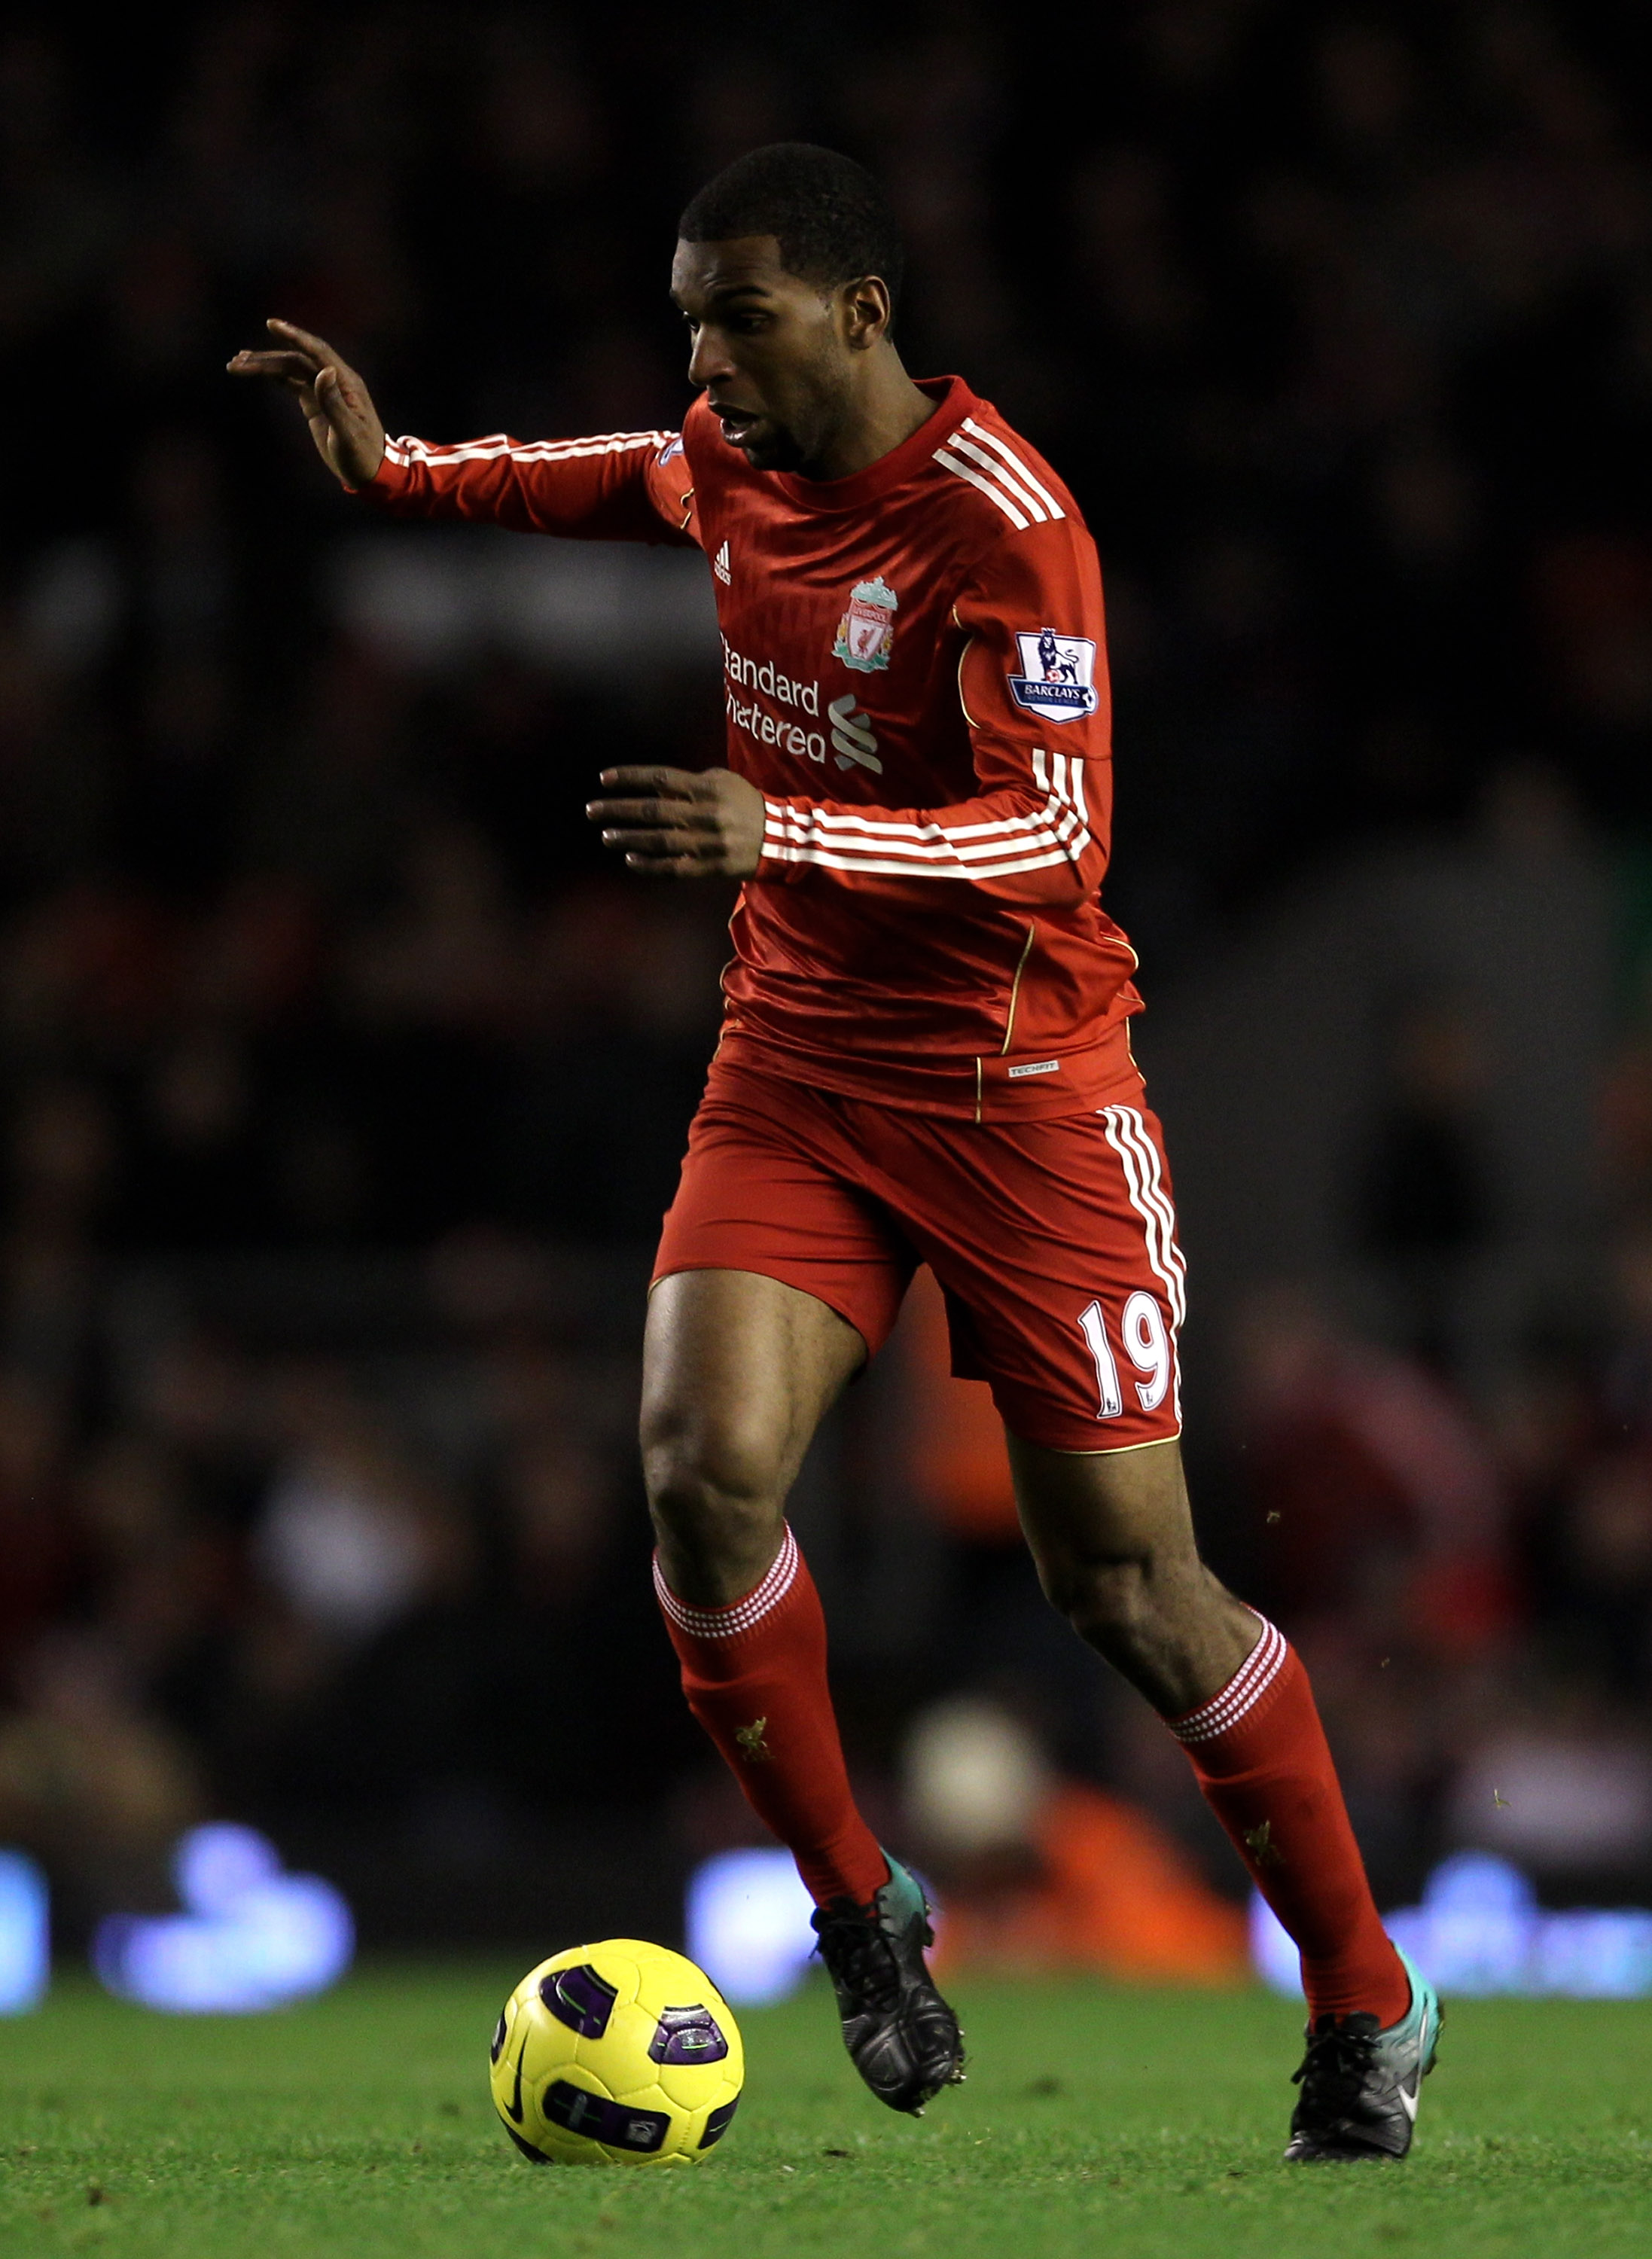 LIVERPOOL, ENGLAND - NOVEMBER 20:  Ryan Babel of Liverpool in action during the Barclays Premier League match between Liverpool and West Ham United at Anfield on November 20, 2010 in Liverpool, England.  (Photo by Alex Livesey/Getty Images)